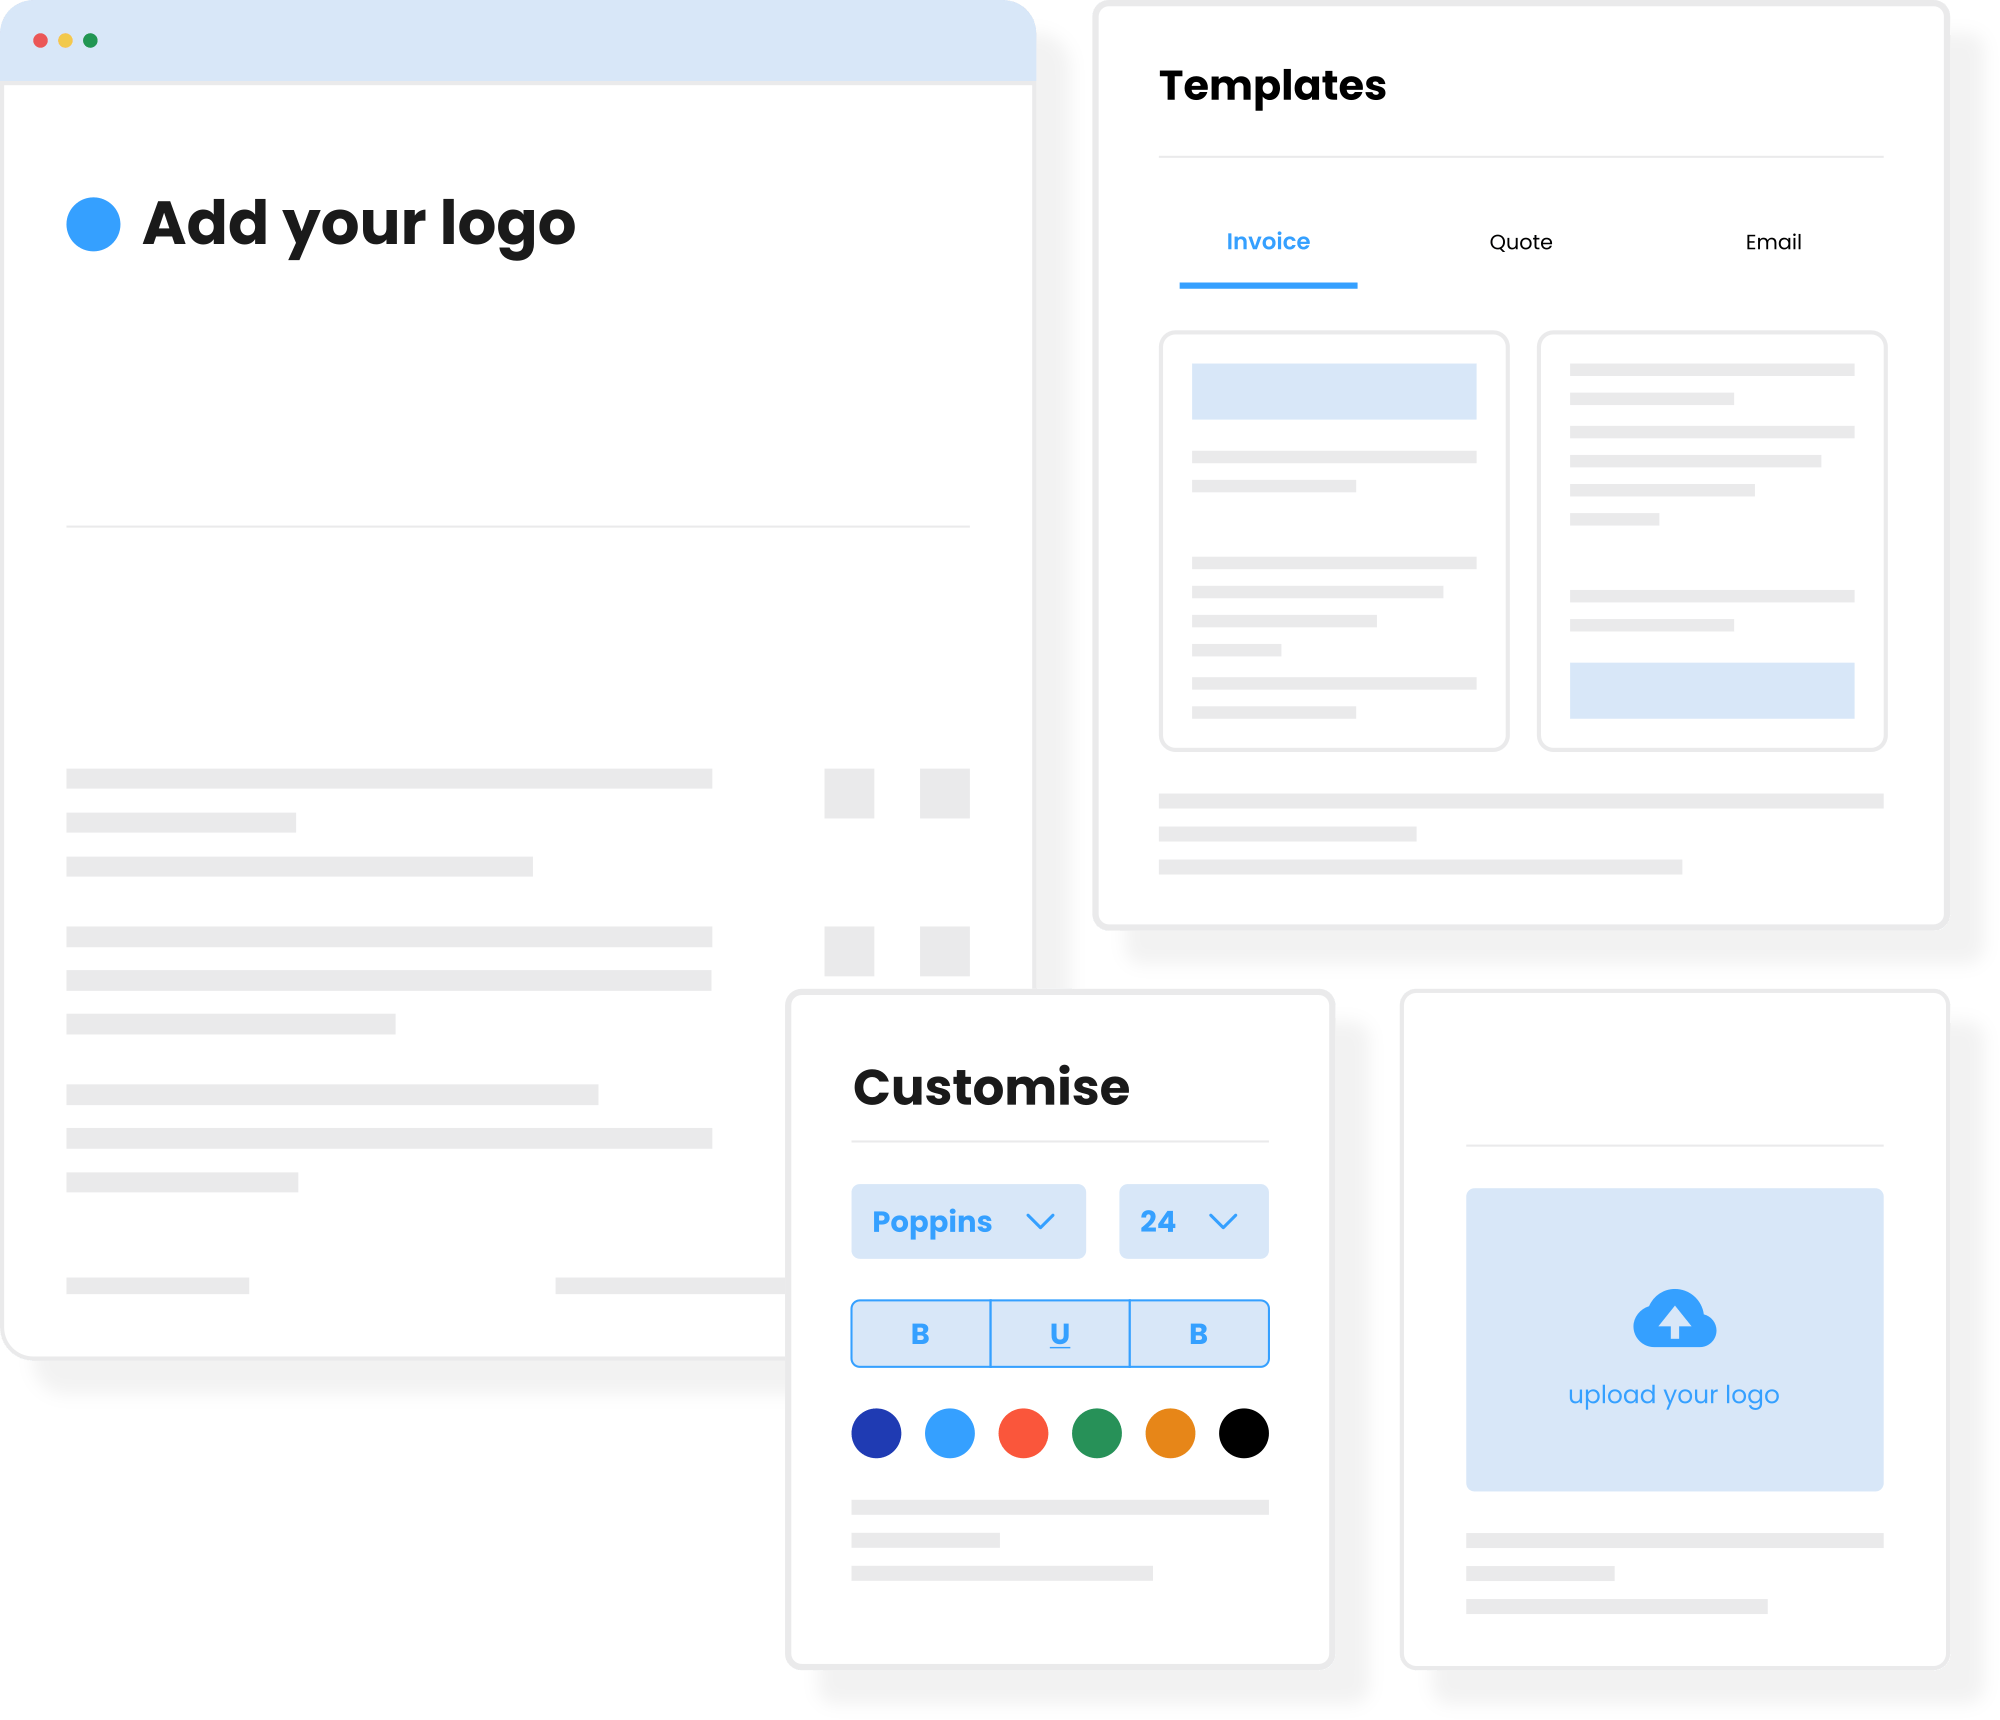 Add your logo to ready-made templates